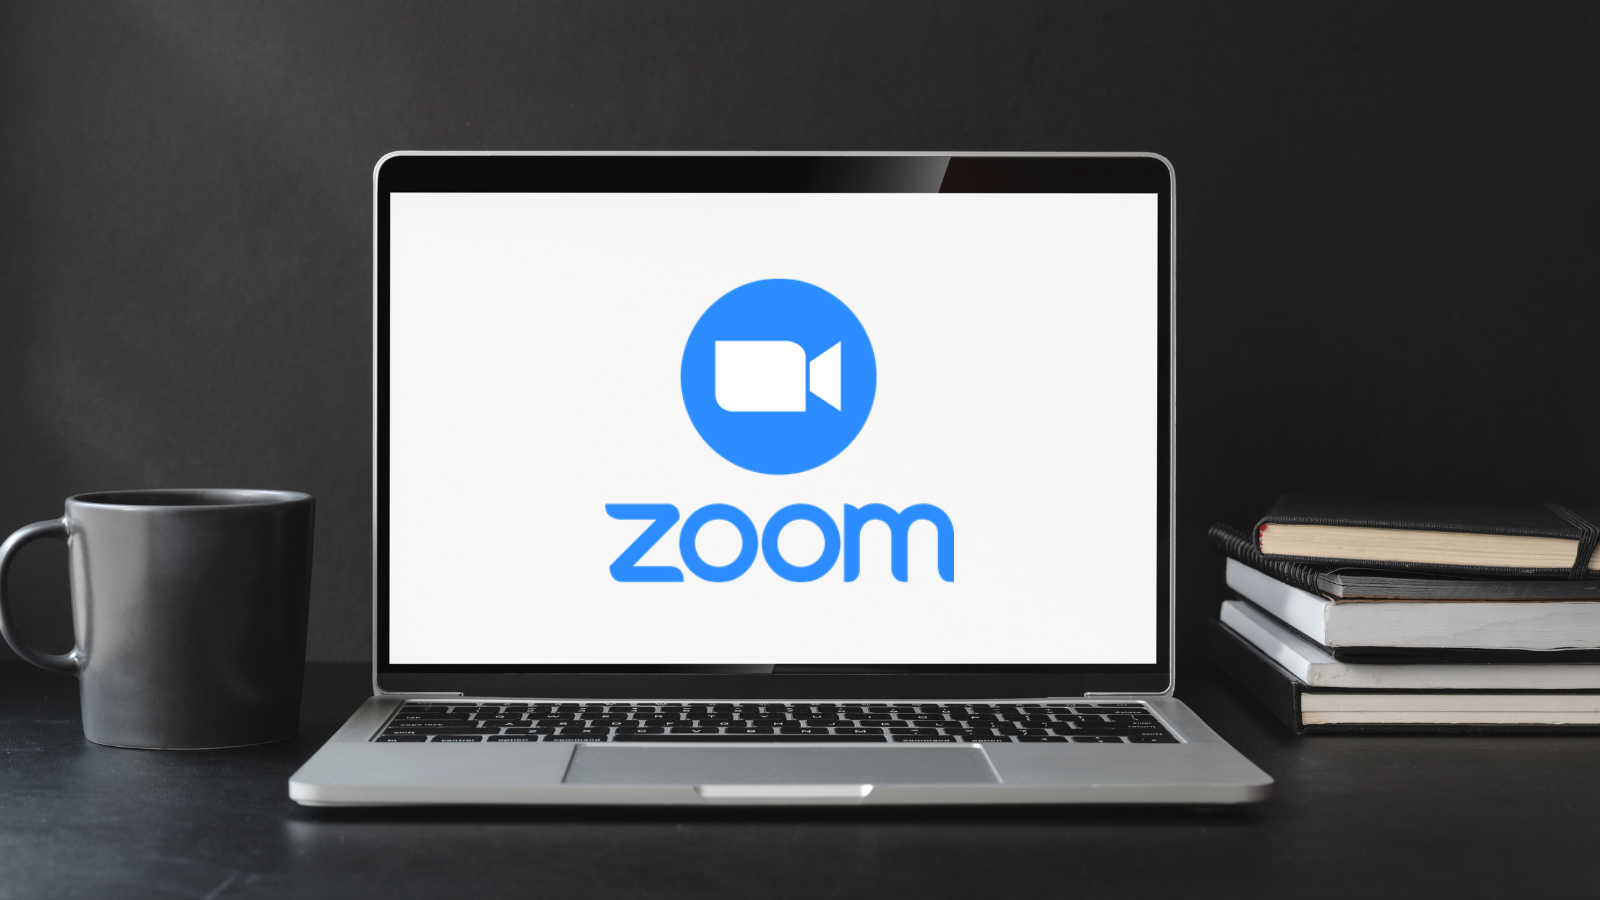 Laptop with Zoom logo on screen